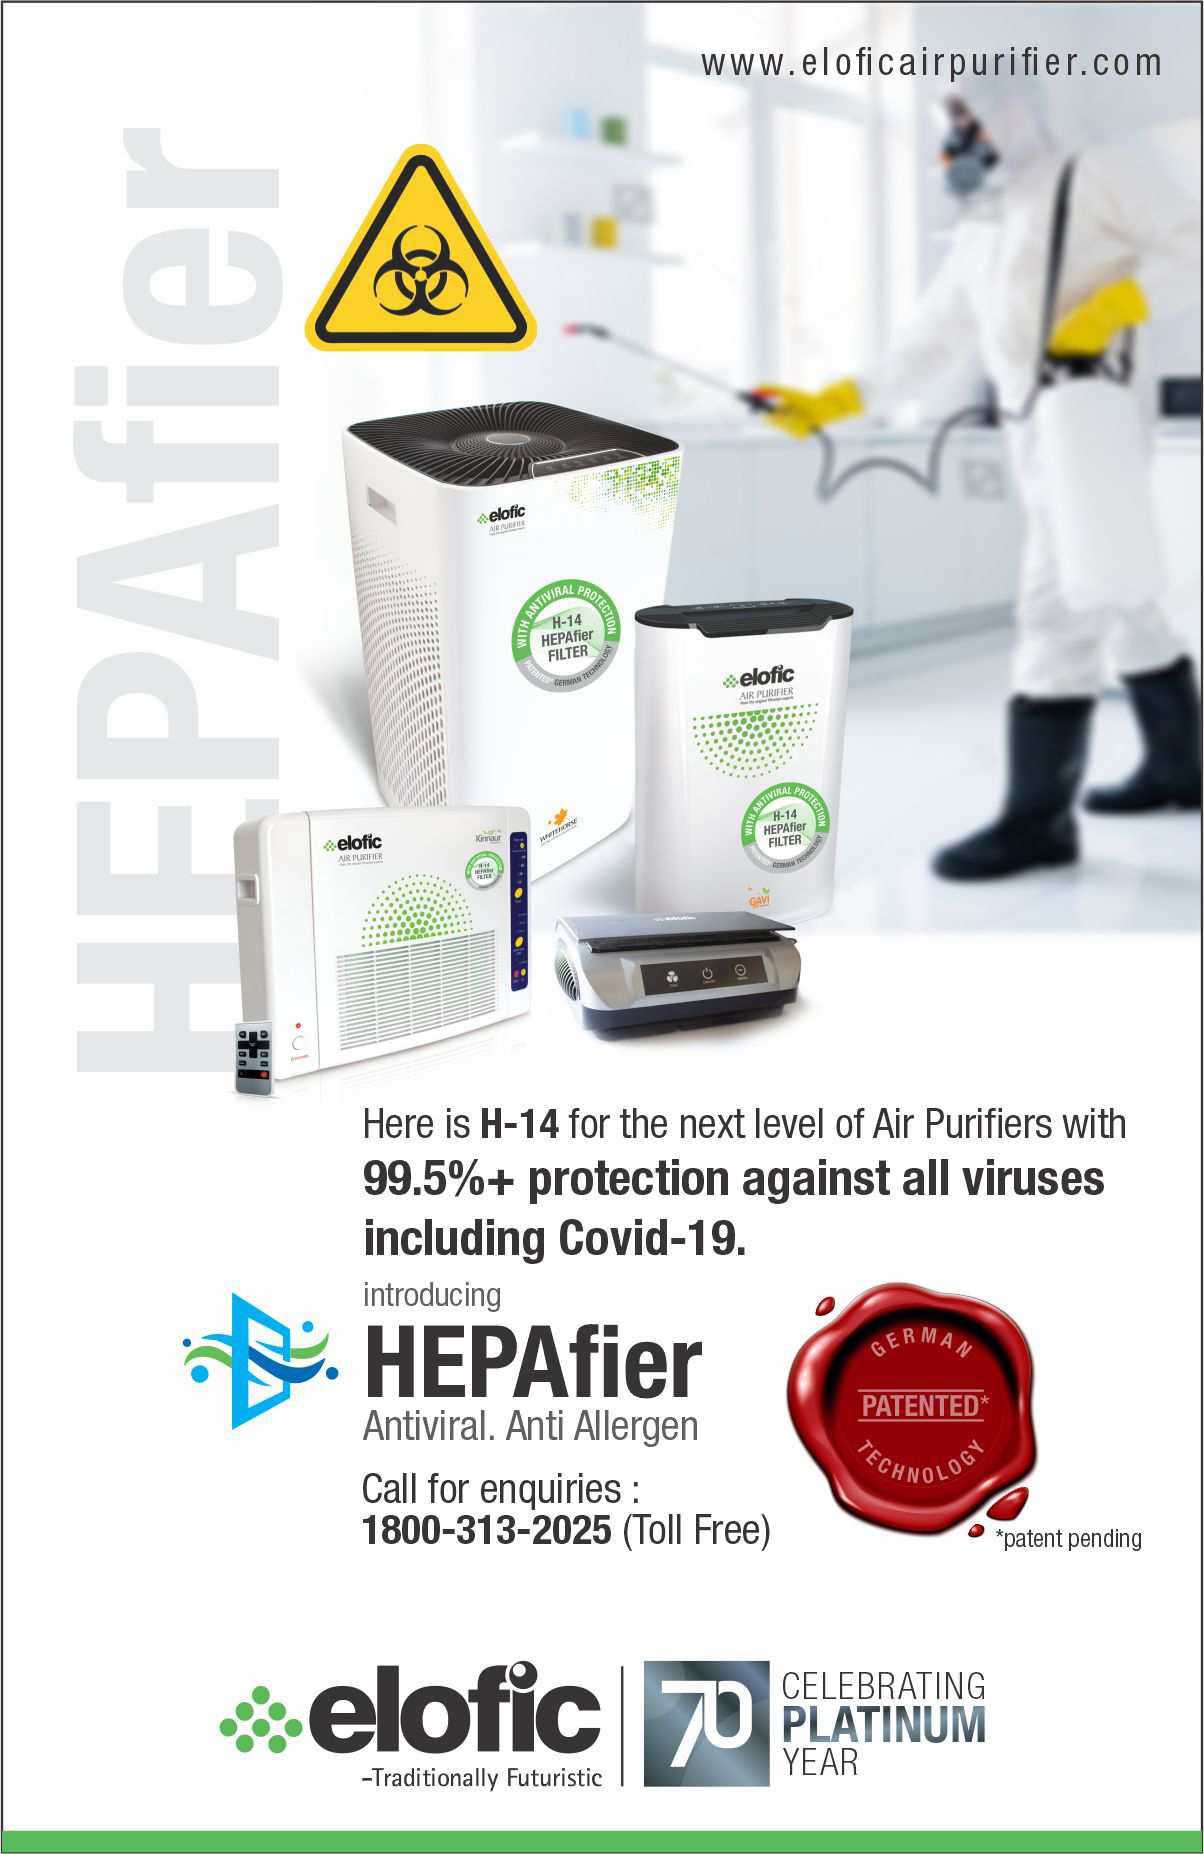 Introducing Antiviral Anti Allergen HEPAFIER (H-14) for the next level of Air Purifiers.